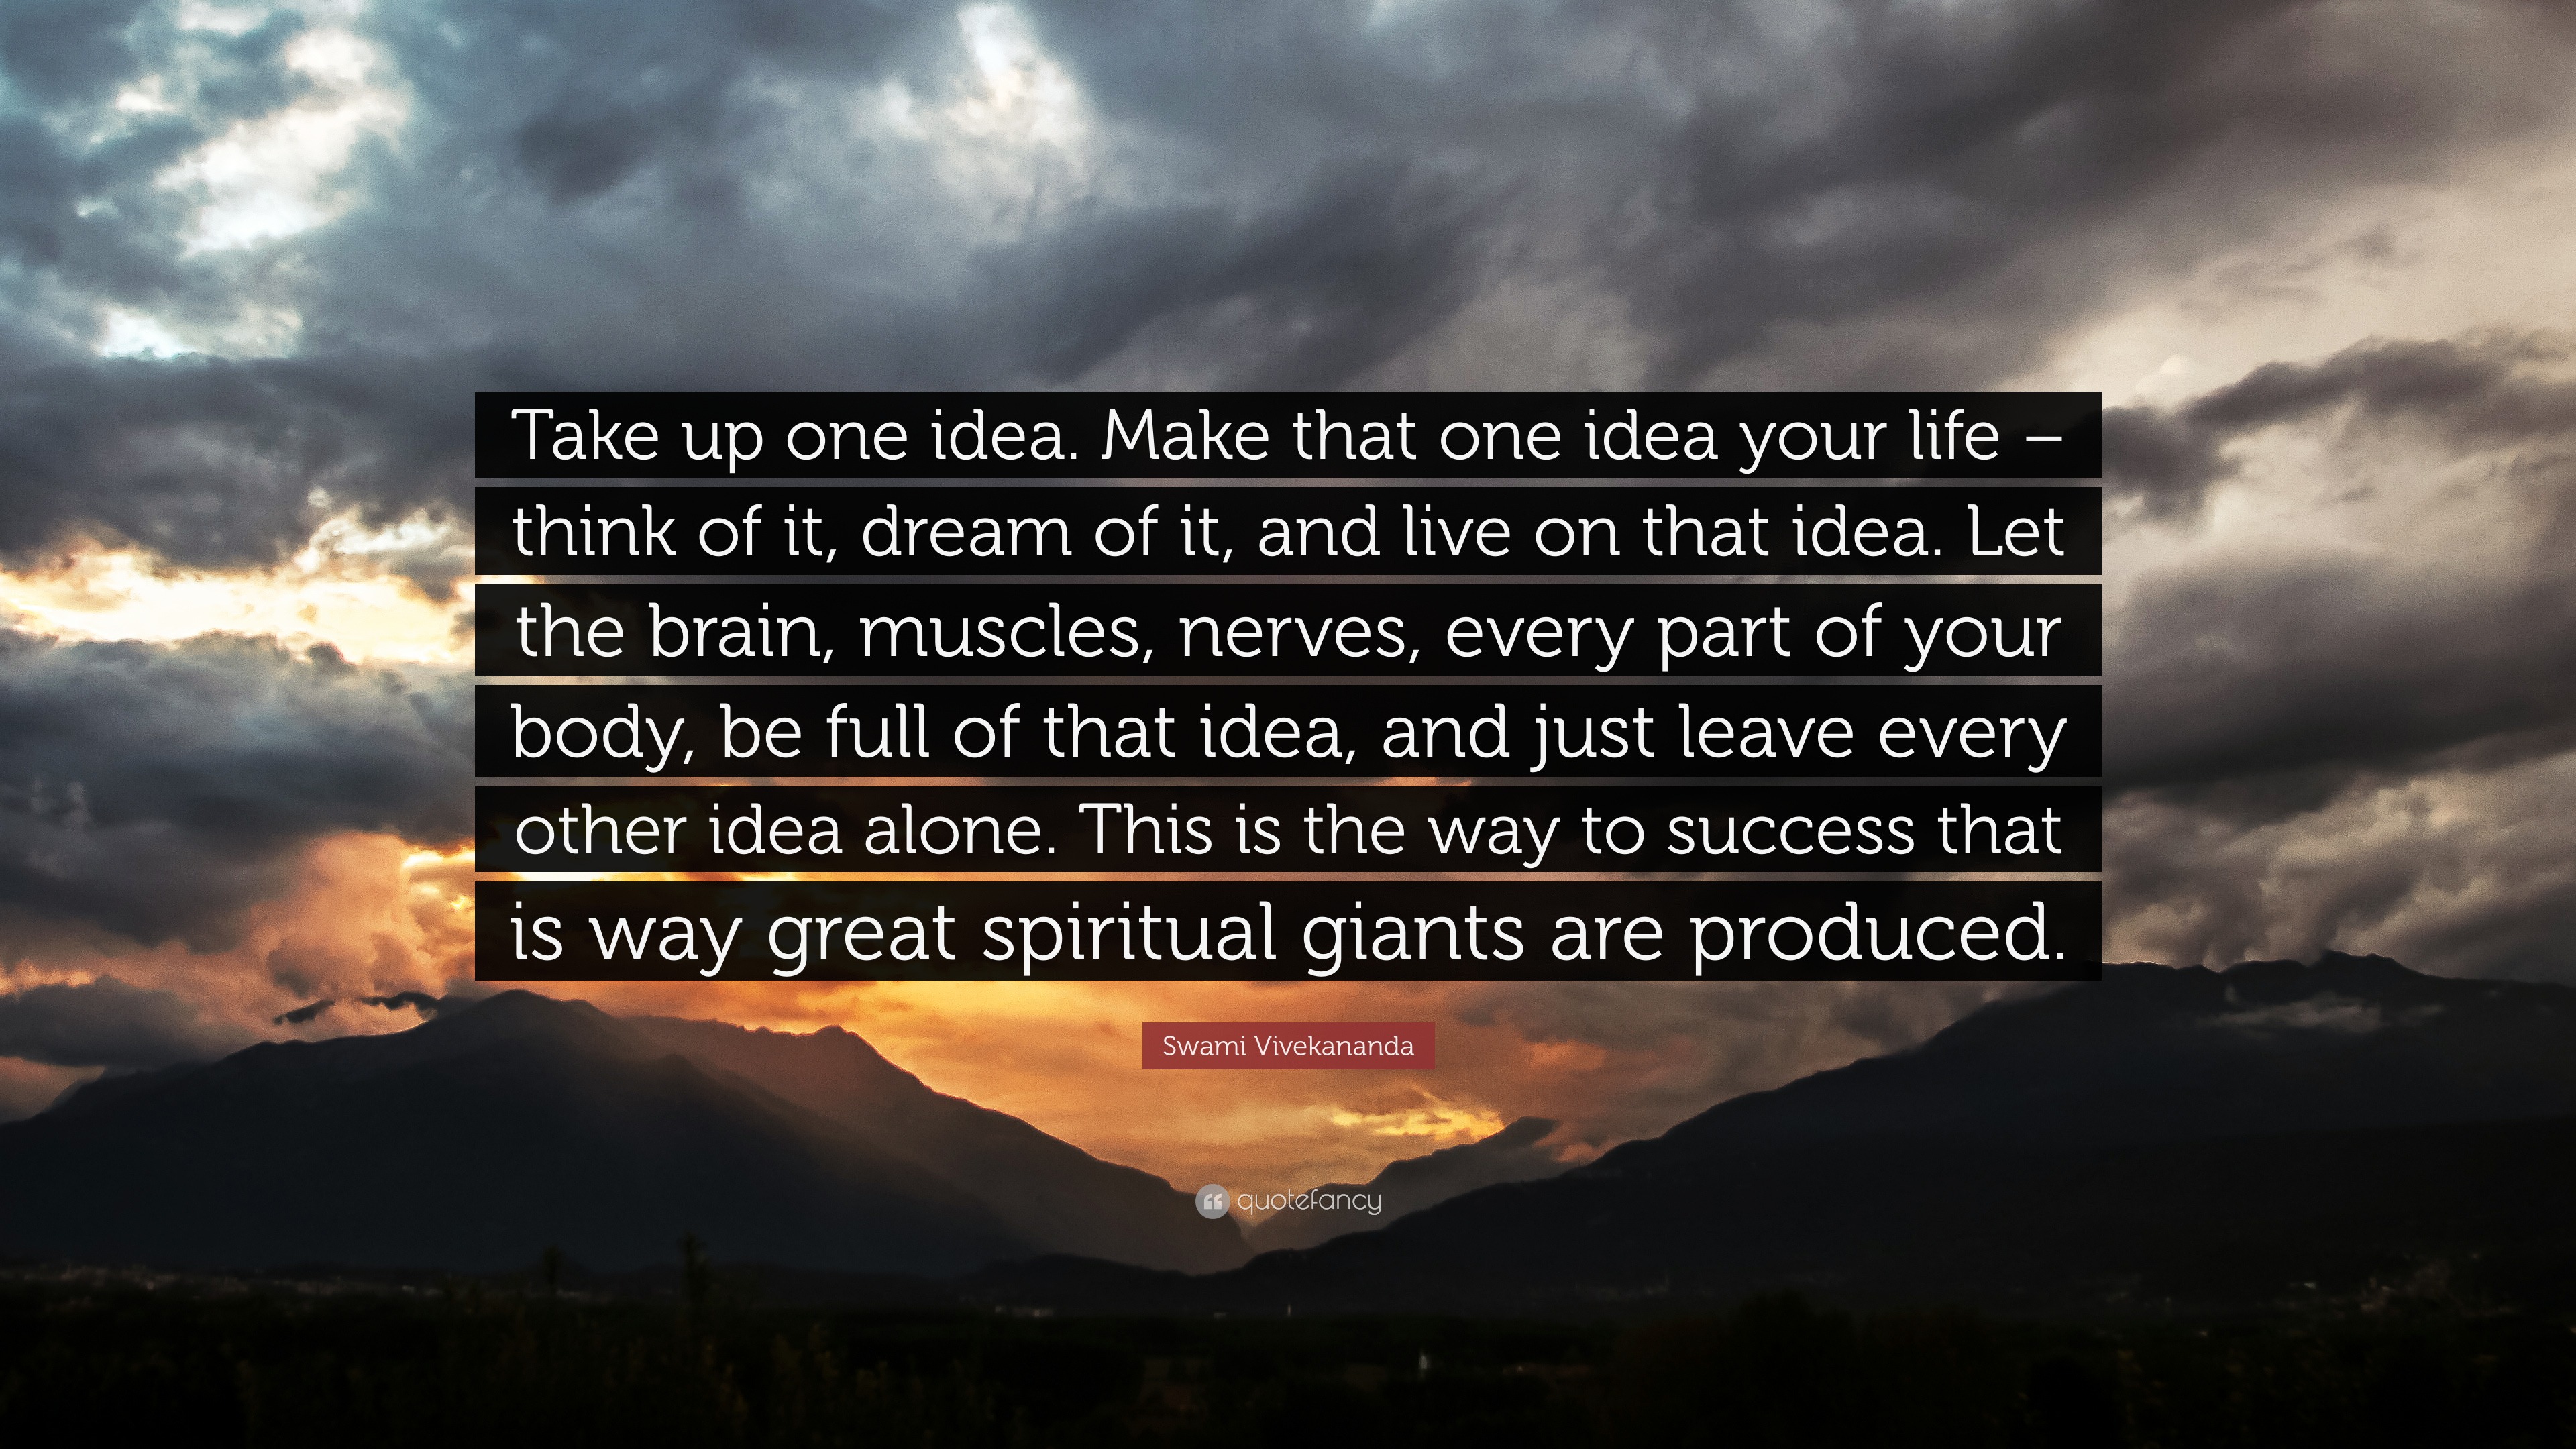 Swami Vivekananda Quote: “Take up one idea. Make that one idea your life –  think of it, dream of it, and live on that idea. Let the brain, muscles...”